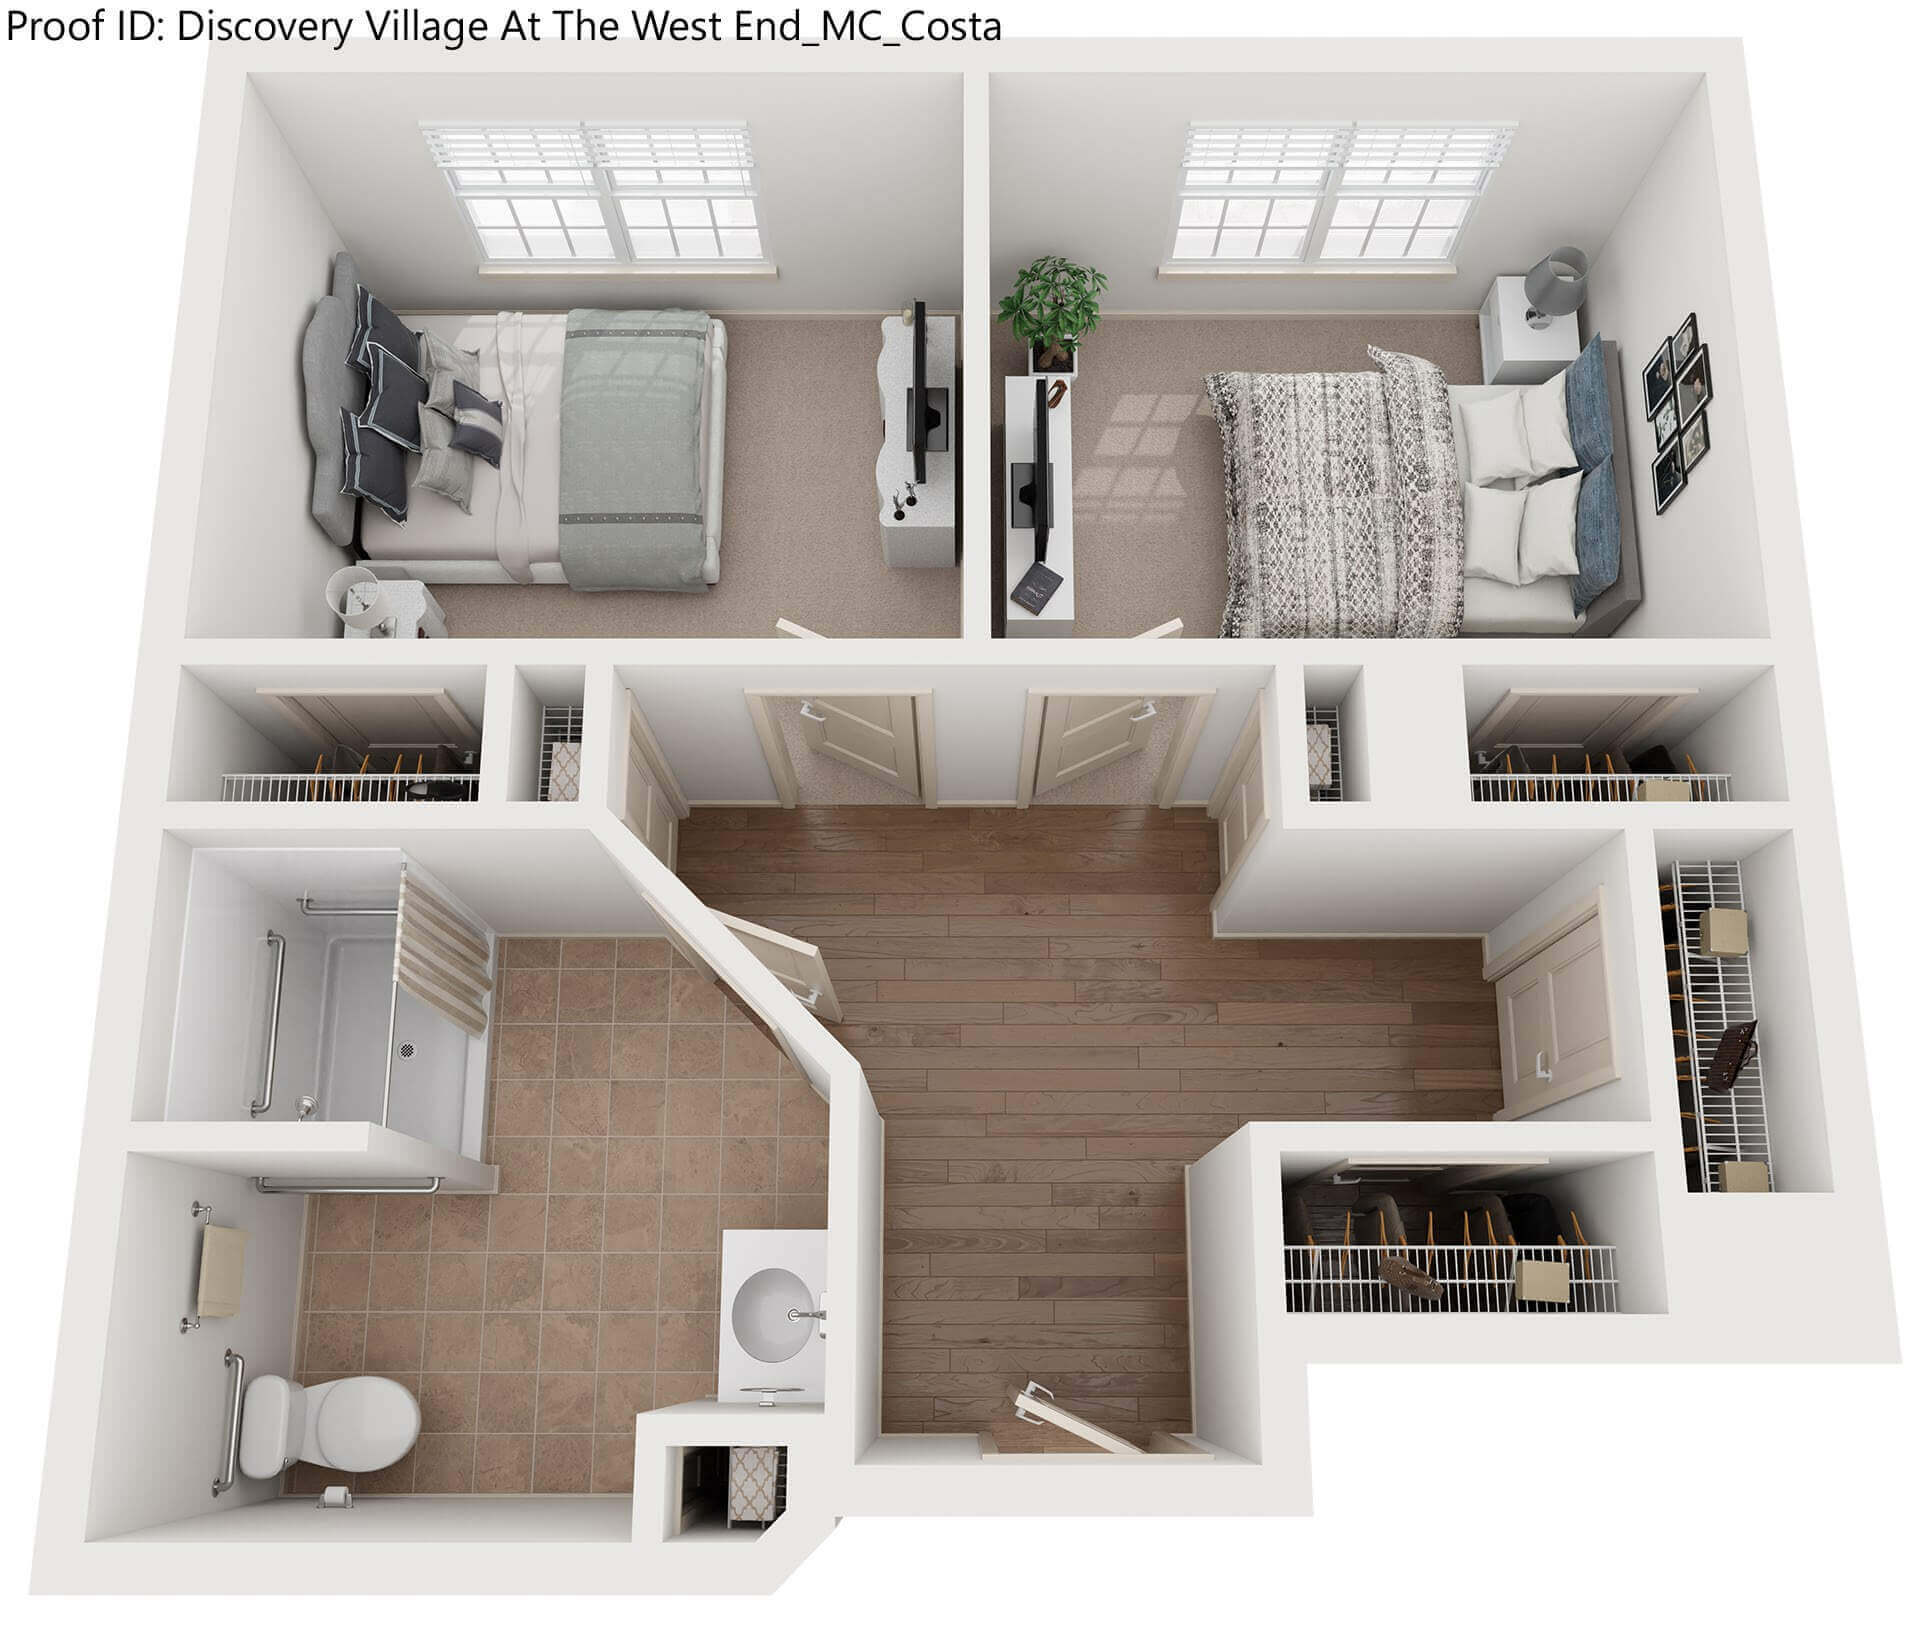 Discovery-Village-At-The-West-End-3D-Proof-2-JPEG_Page_15